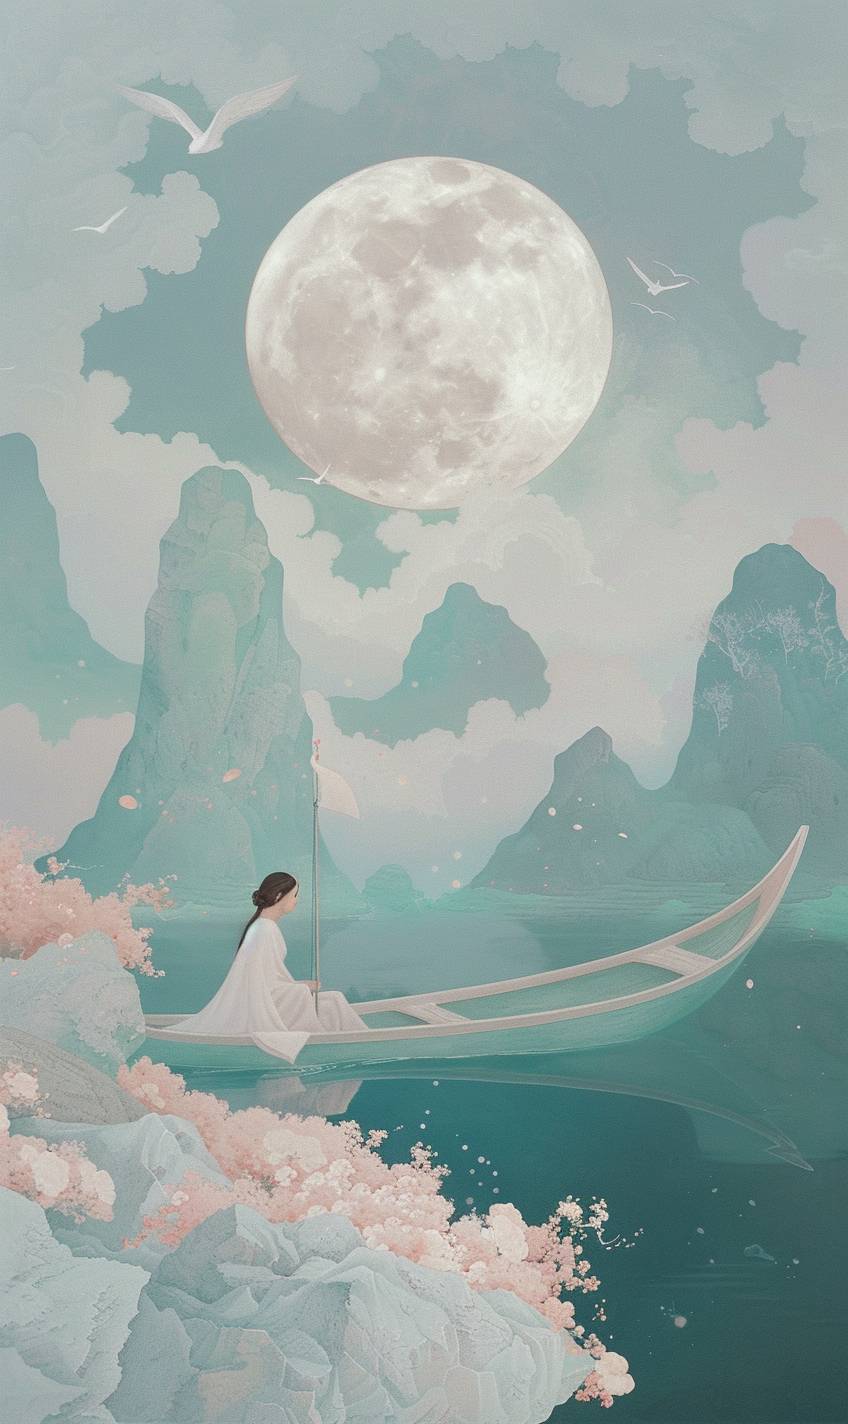 In style of Hsiao Ron Cheng, Spacefarer embarking on voyages to uncharted realms